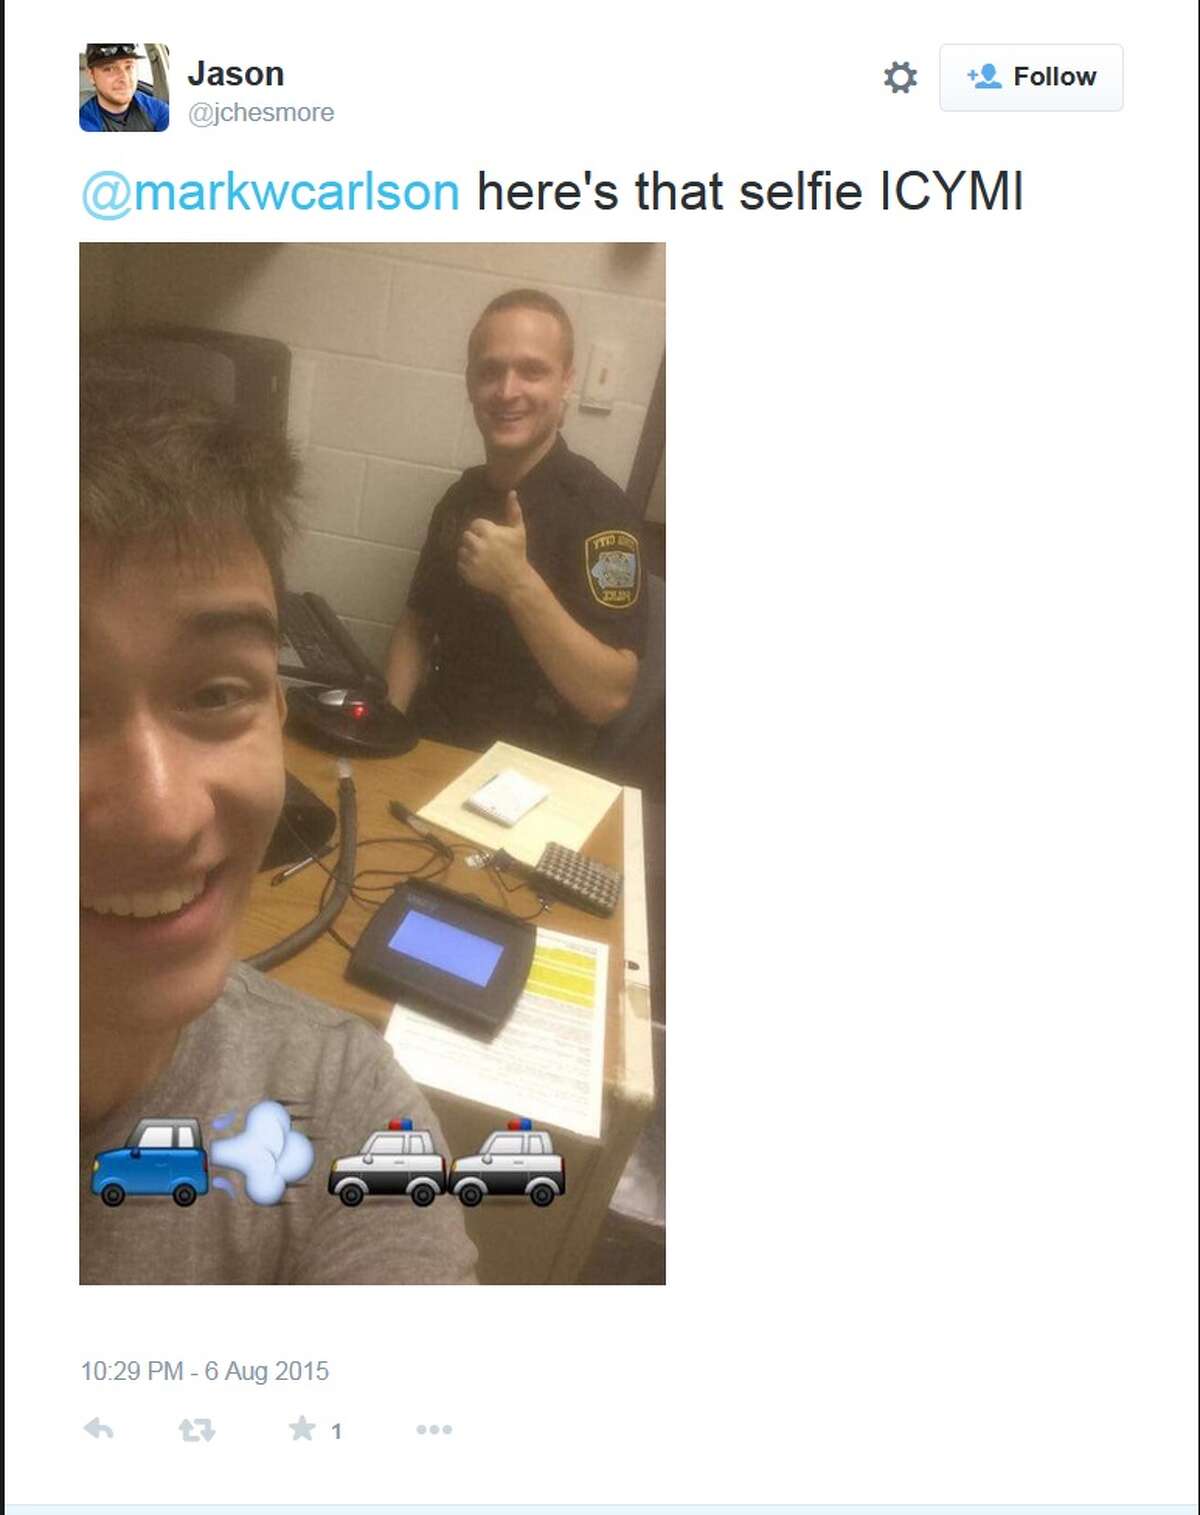 Gilbert Phelps’ original selfie, emojis and all, with his arresting officer that was shared around Twitter.